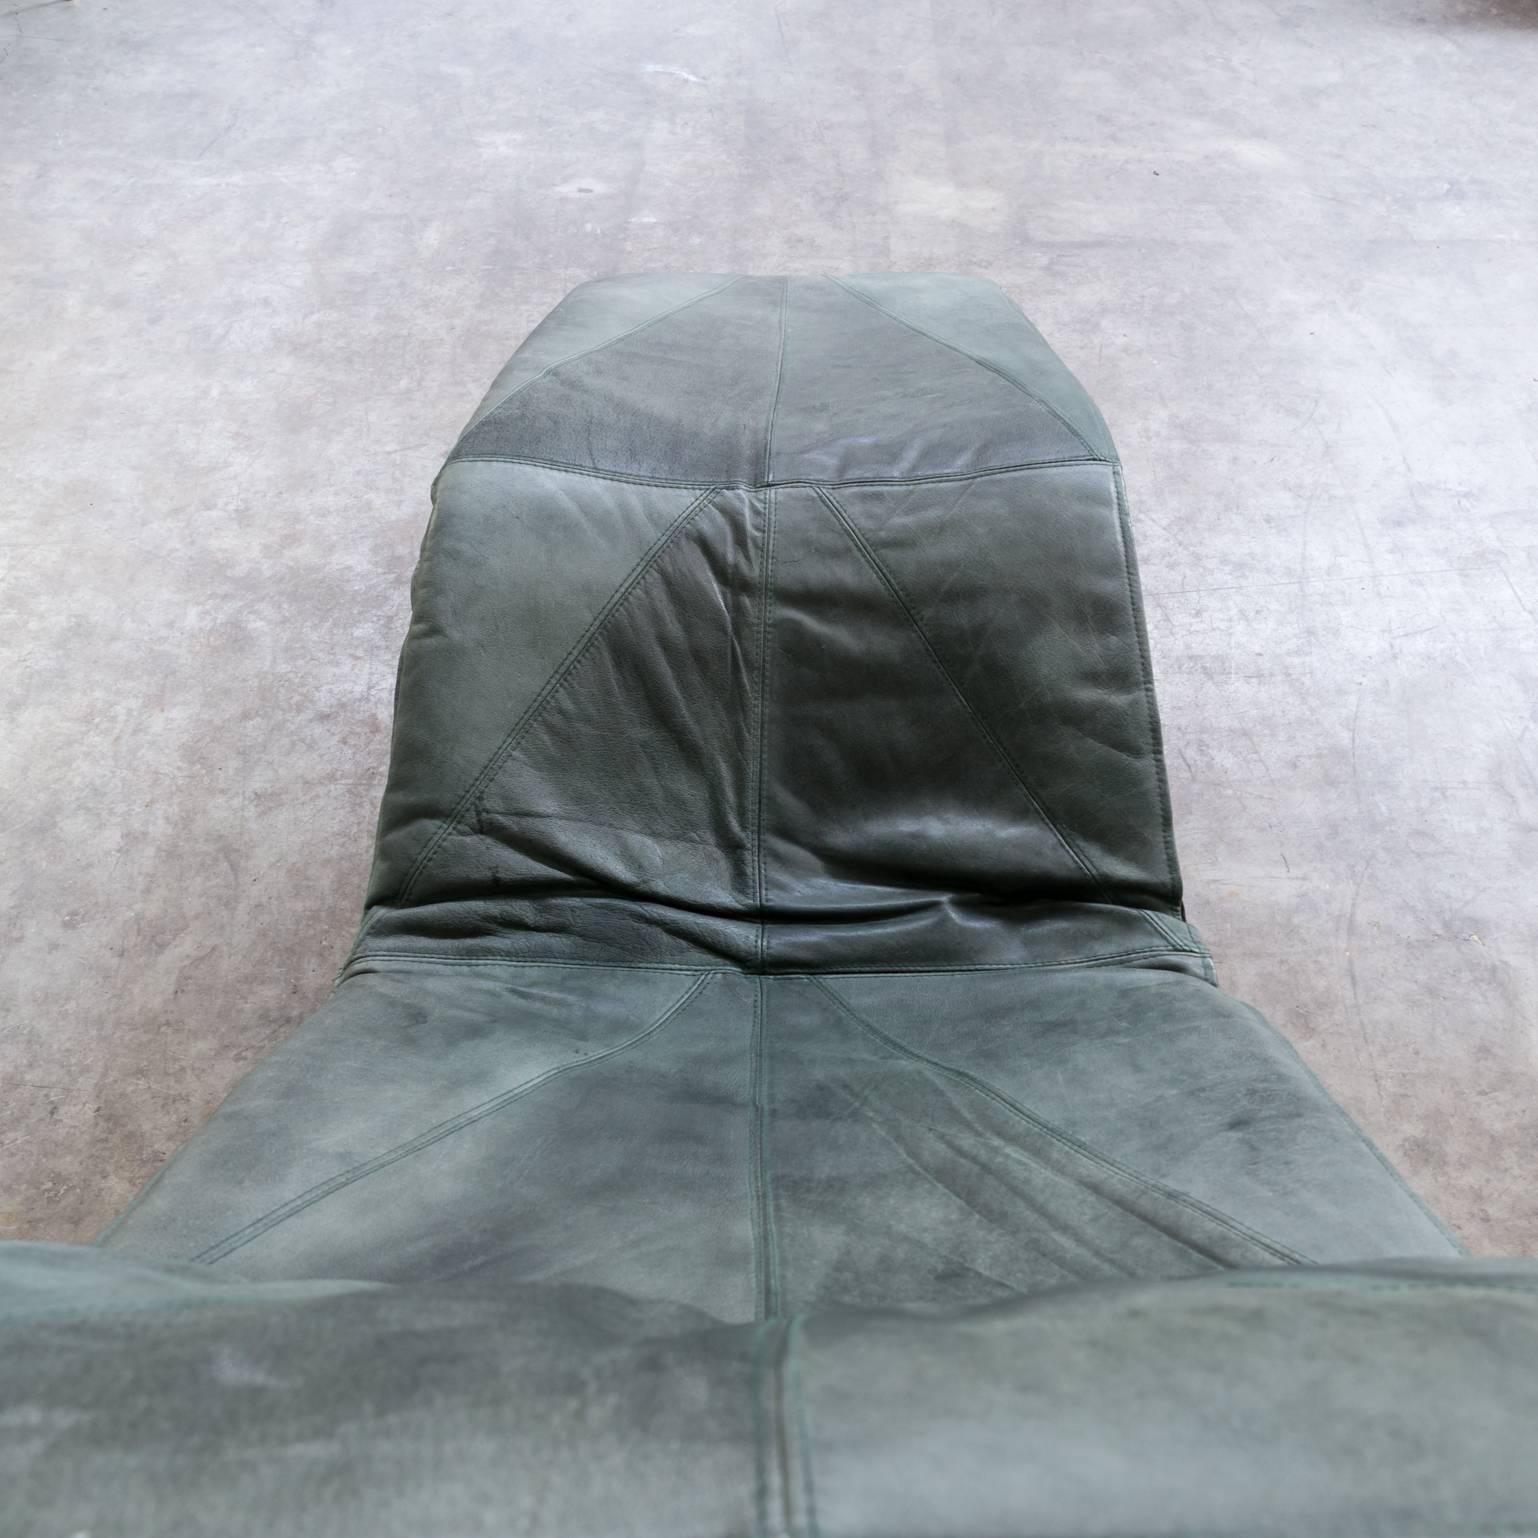 Steel 1980s Tord Björklund ‘Skye’ Chaise Longue Chair Leather For Sale